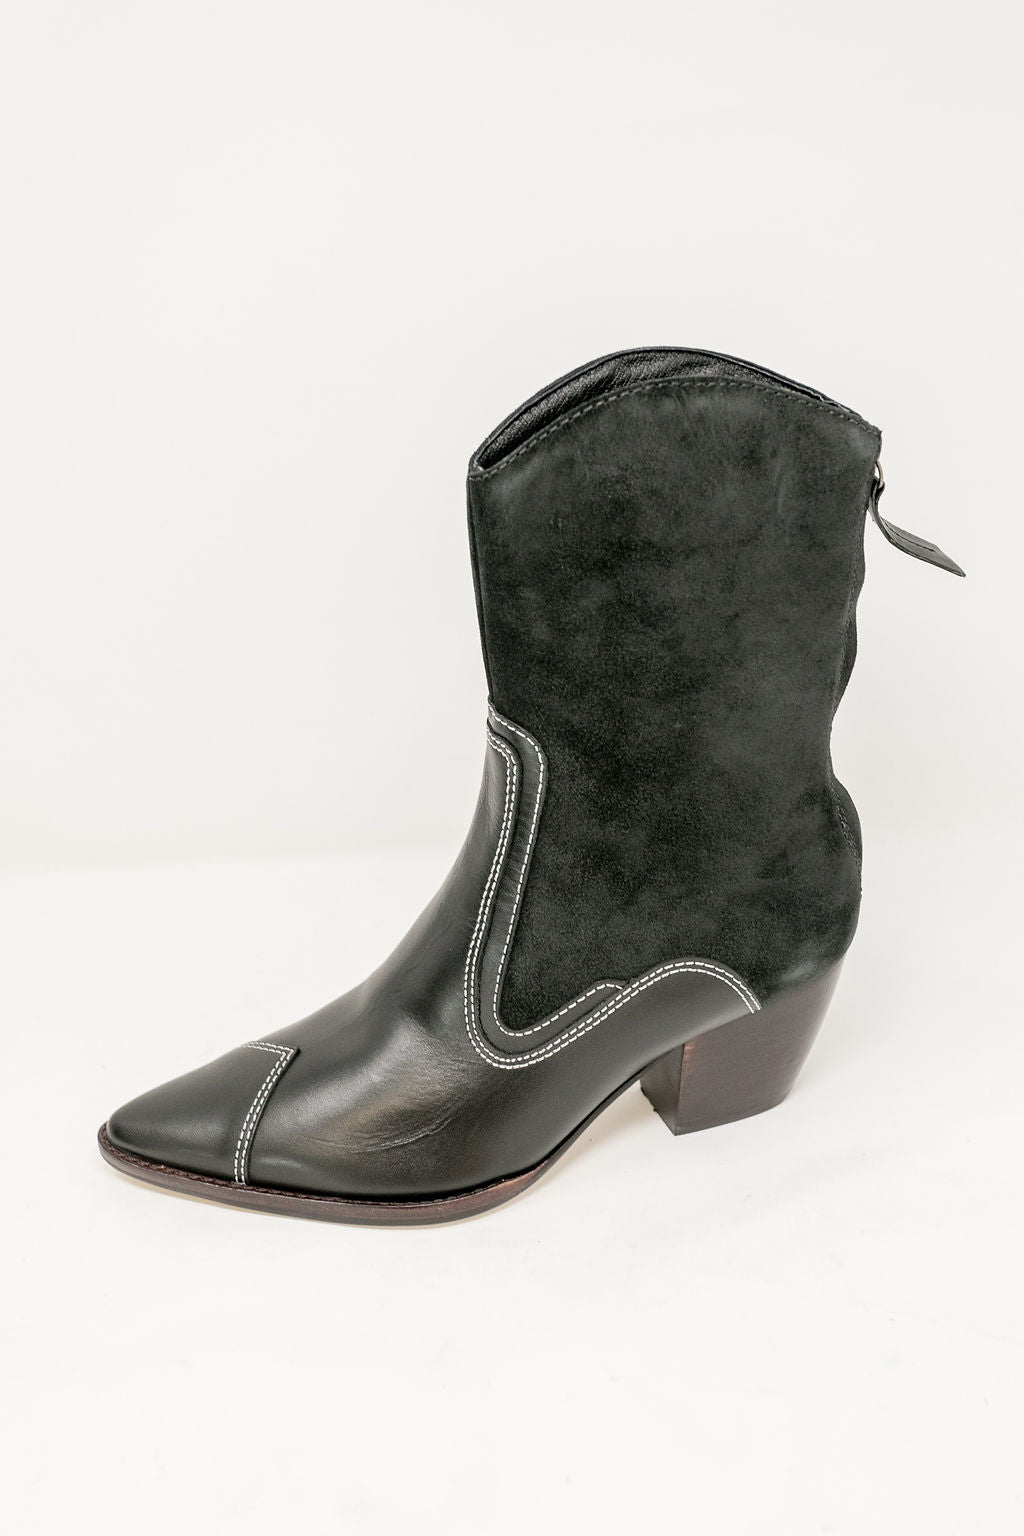 Matisse | Carina Western Boot | Black Suede & Leather - Poppy and Stella